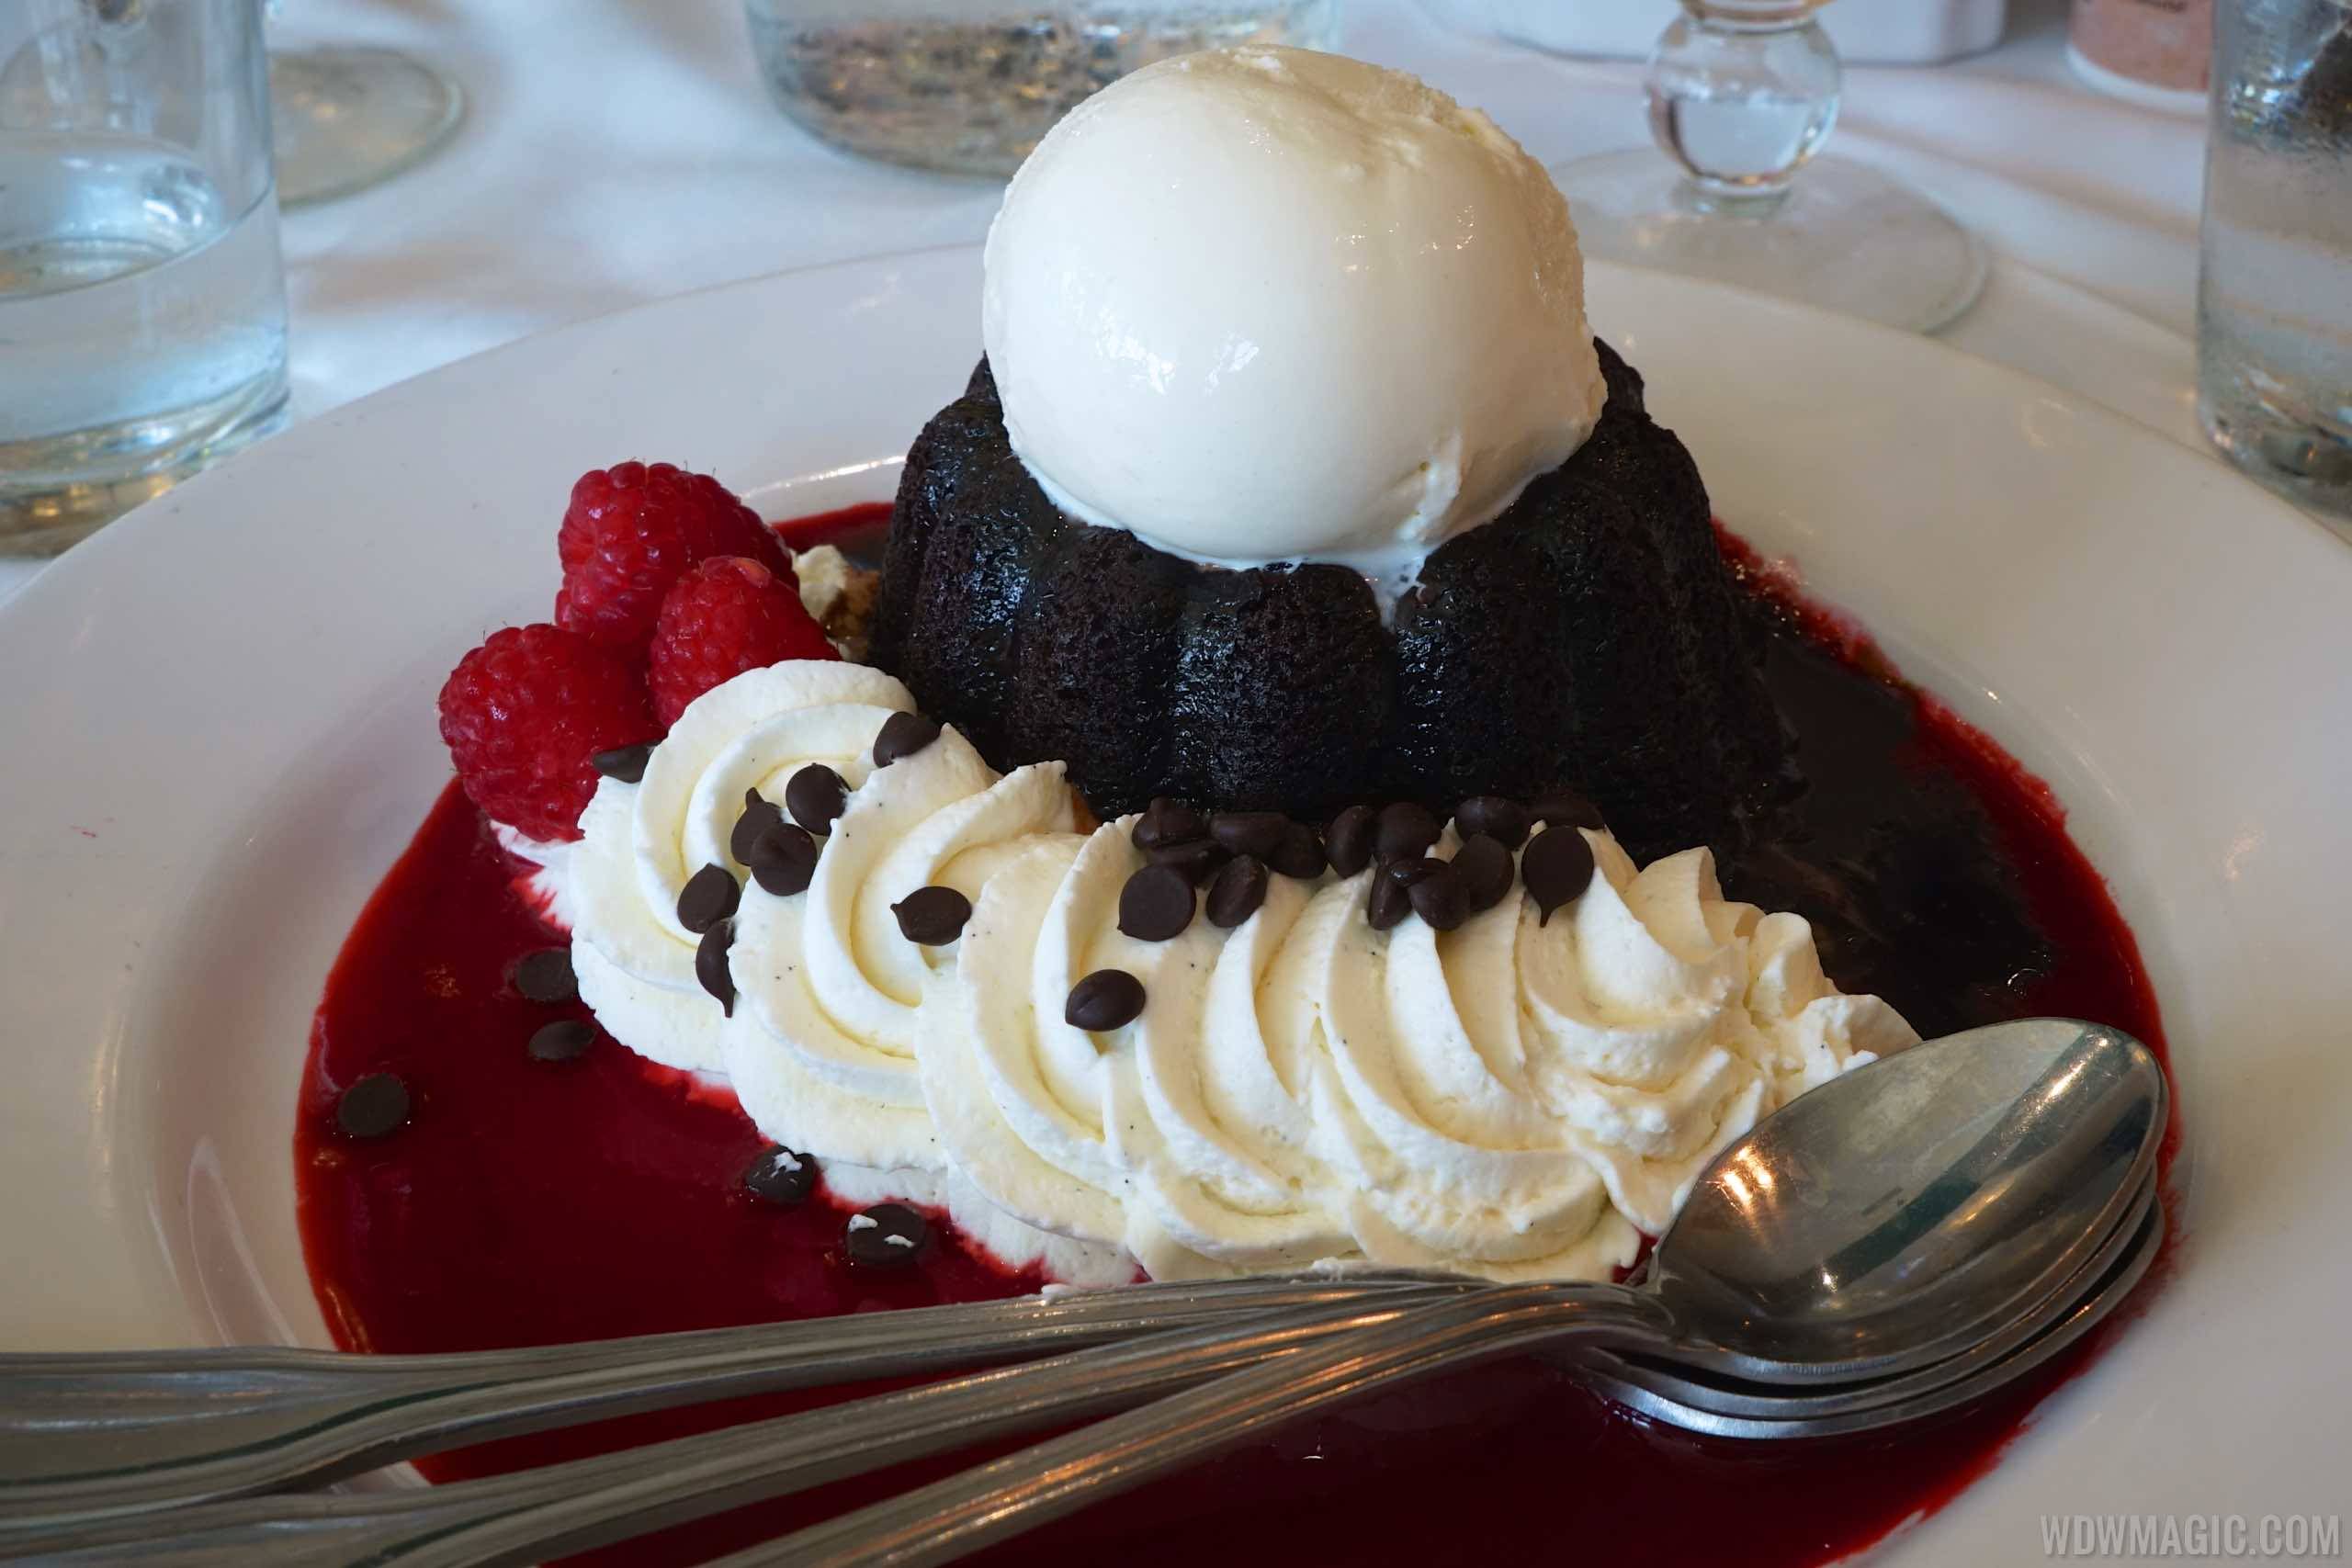 The BOATHOUSE Lunch - Double Chocolate Bundt Cake $10